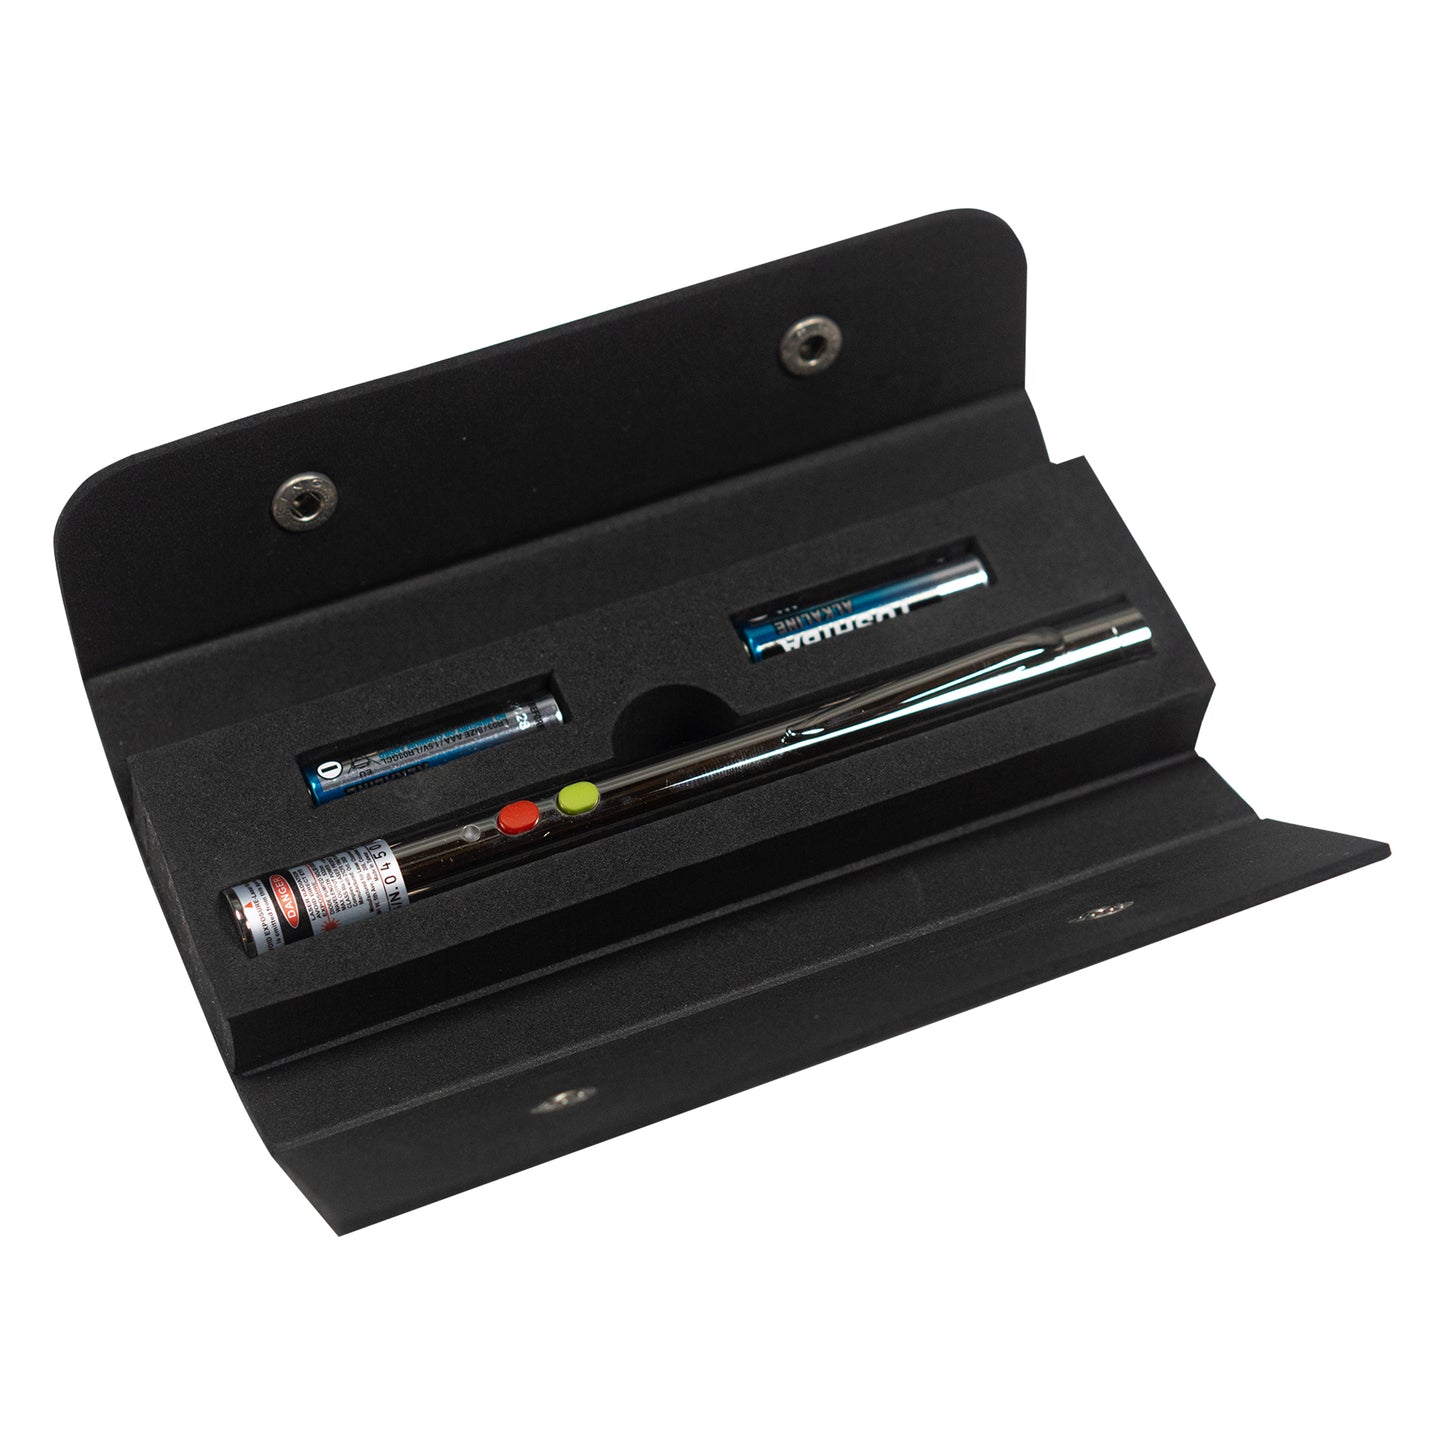 black foam carrying case for red/green dual laser pointer pen with batteries included